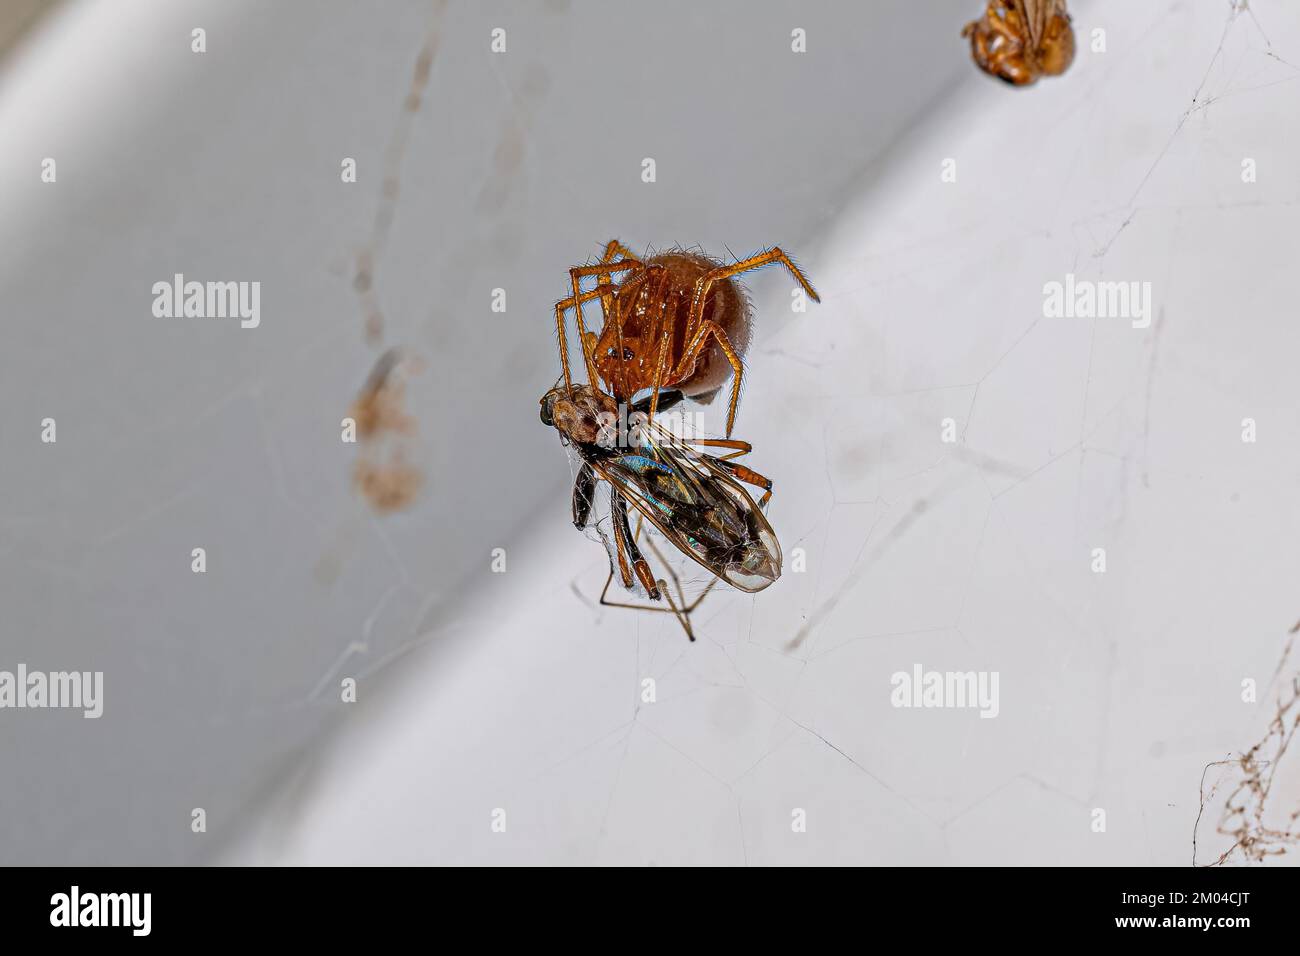 Red House Spider of the species Nesticodes rufipes preying on a fly Stock Photo